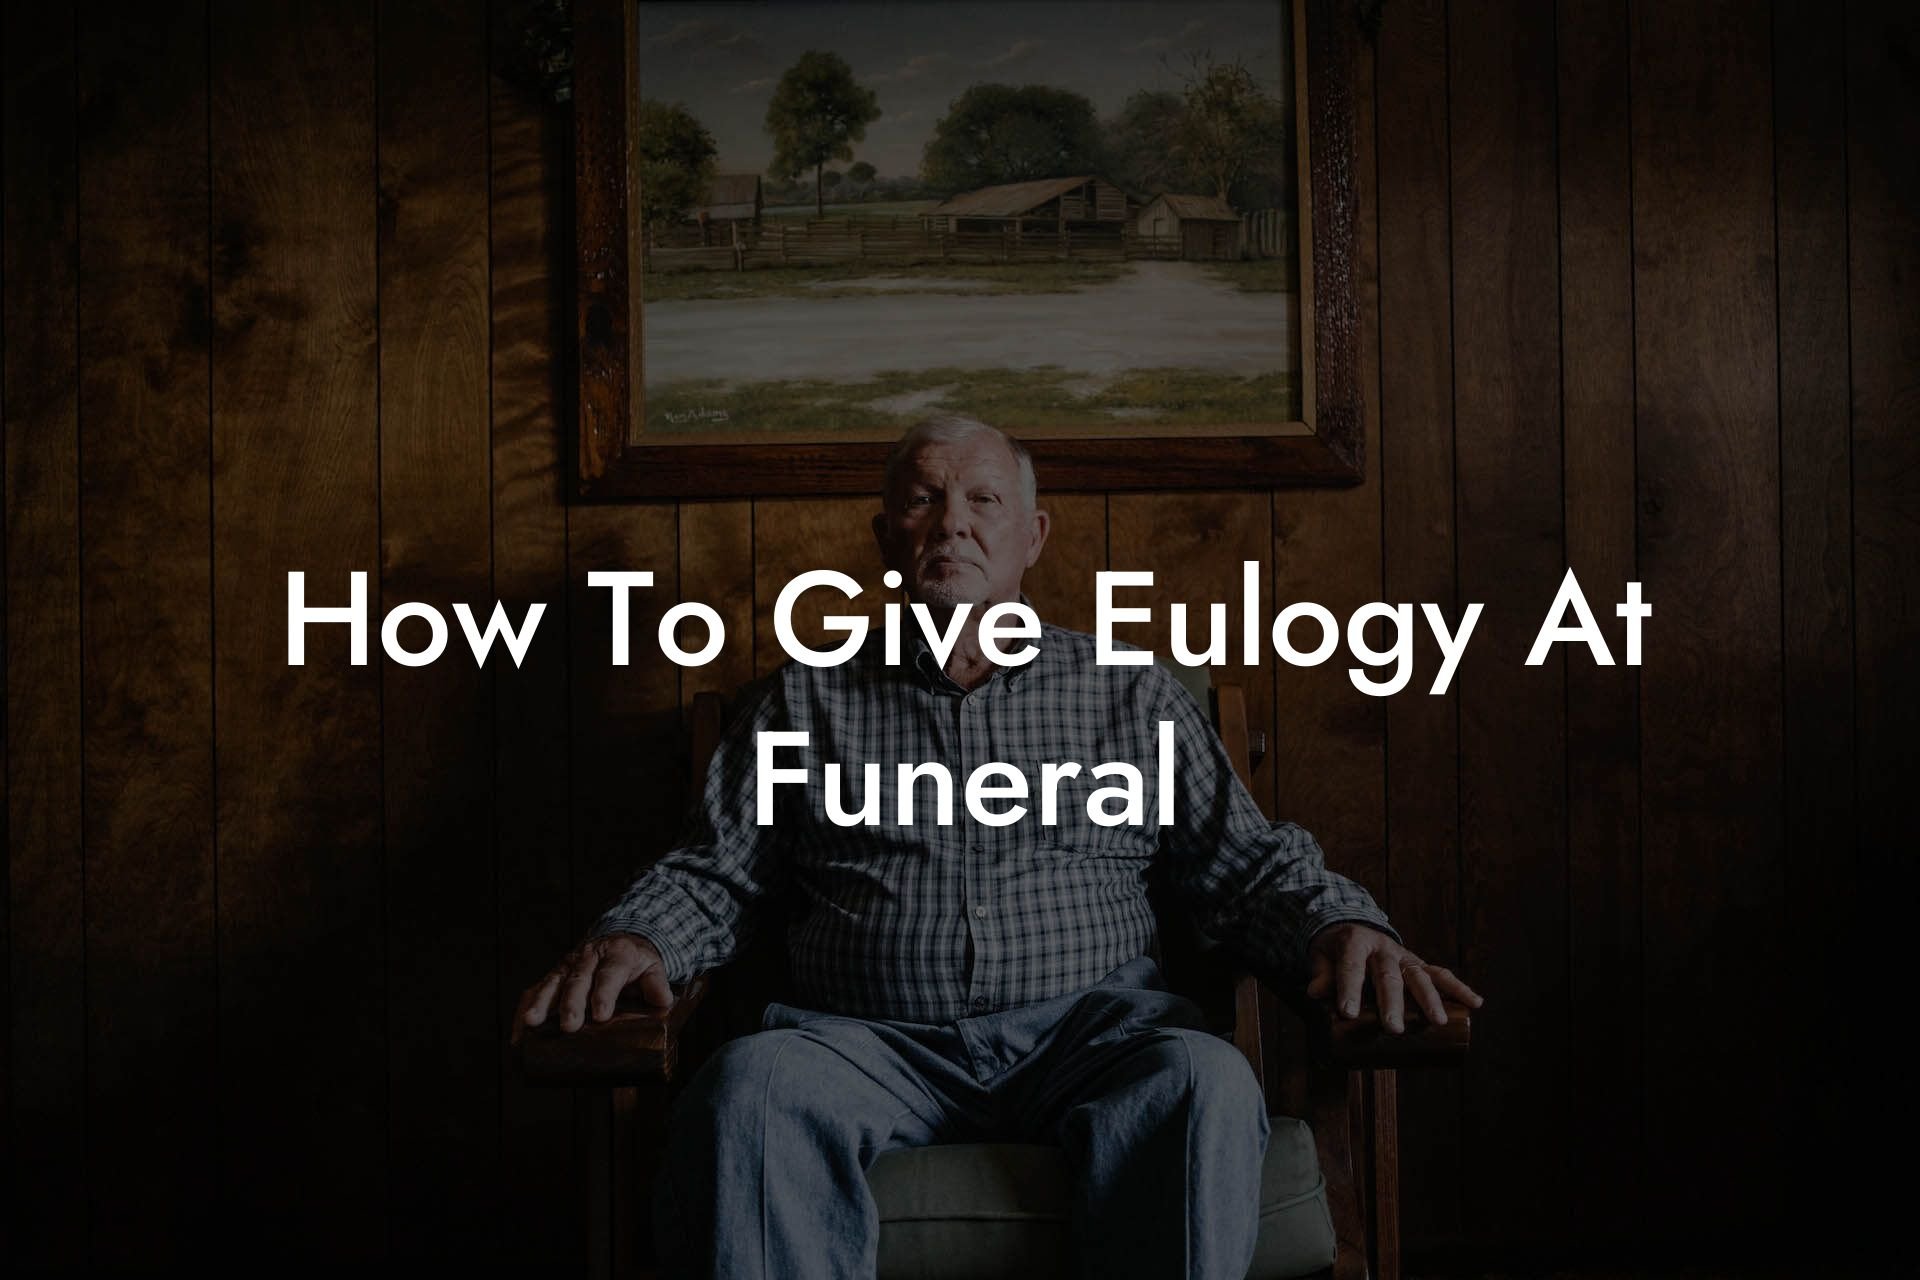 How To Give Eulogy At Funeral